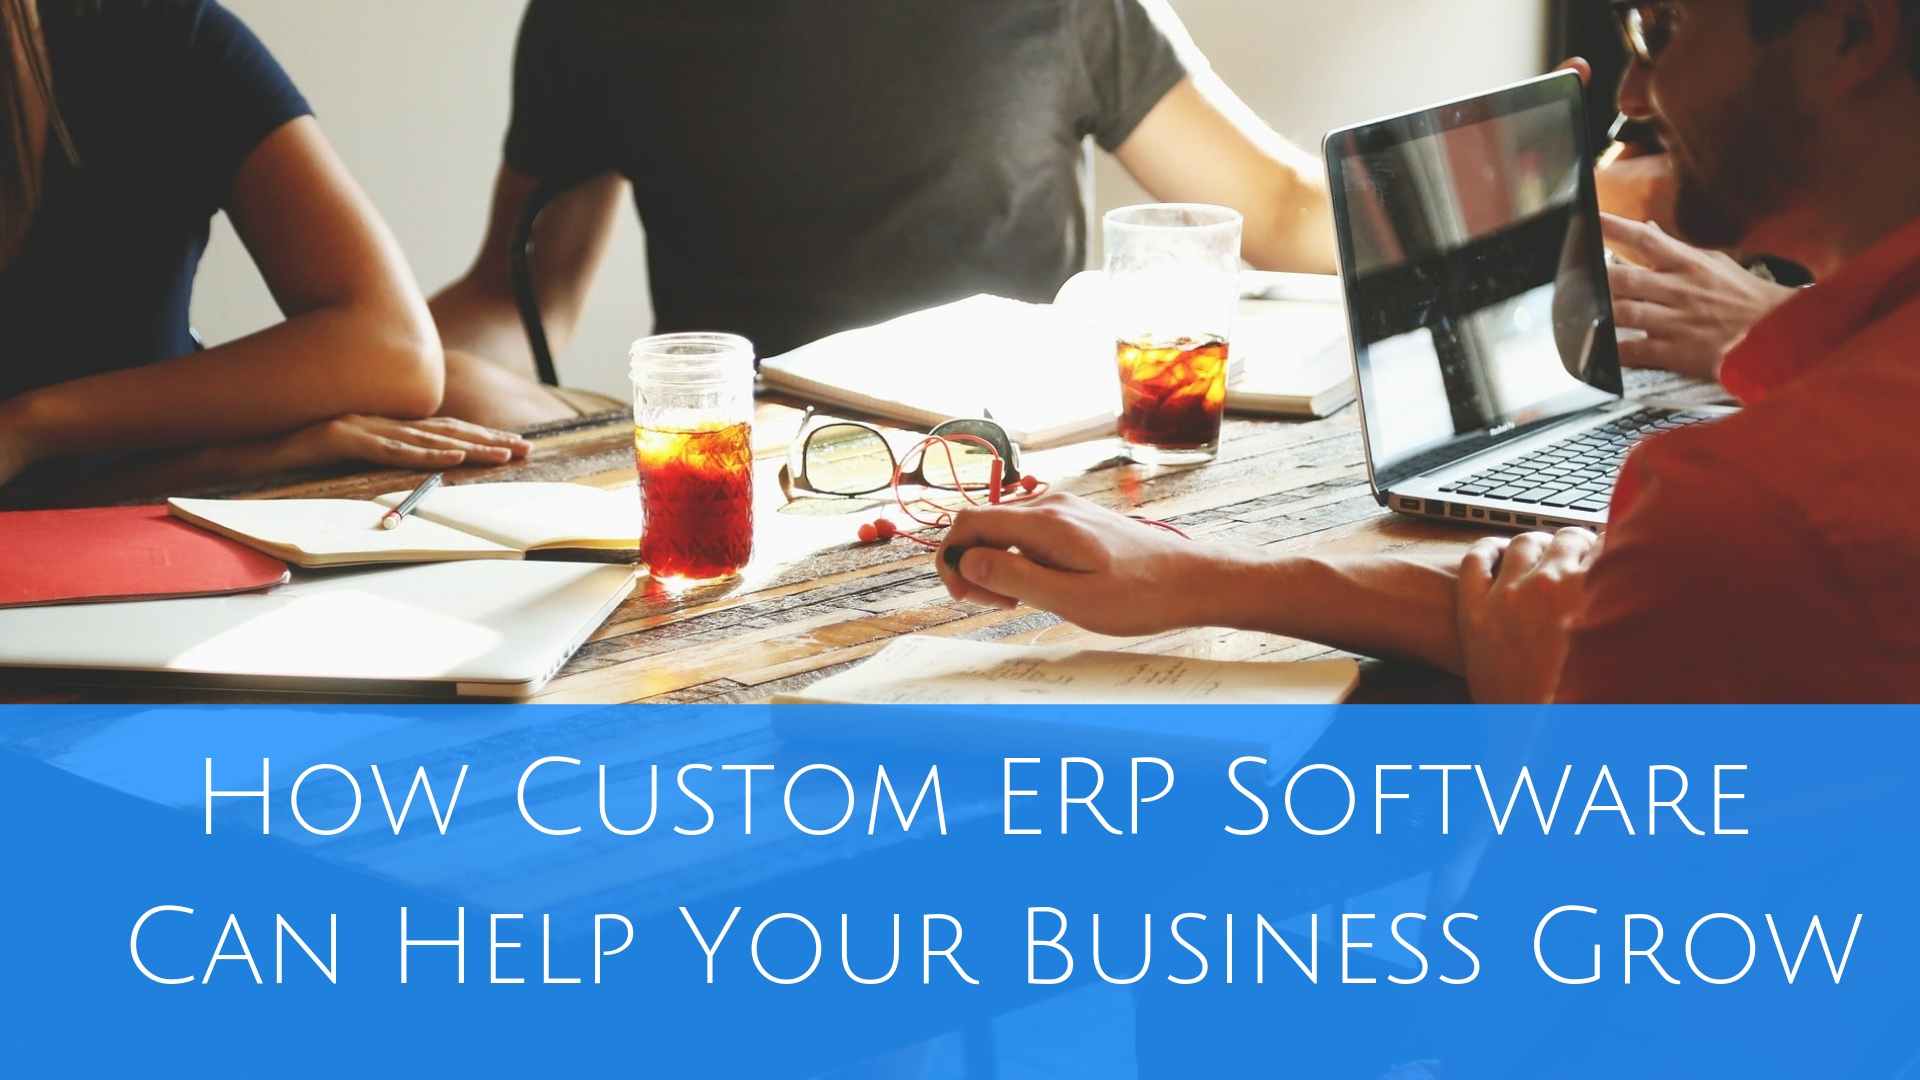 How Custom ERP Software Can Help Your Business Grow